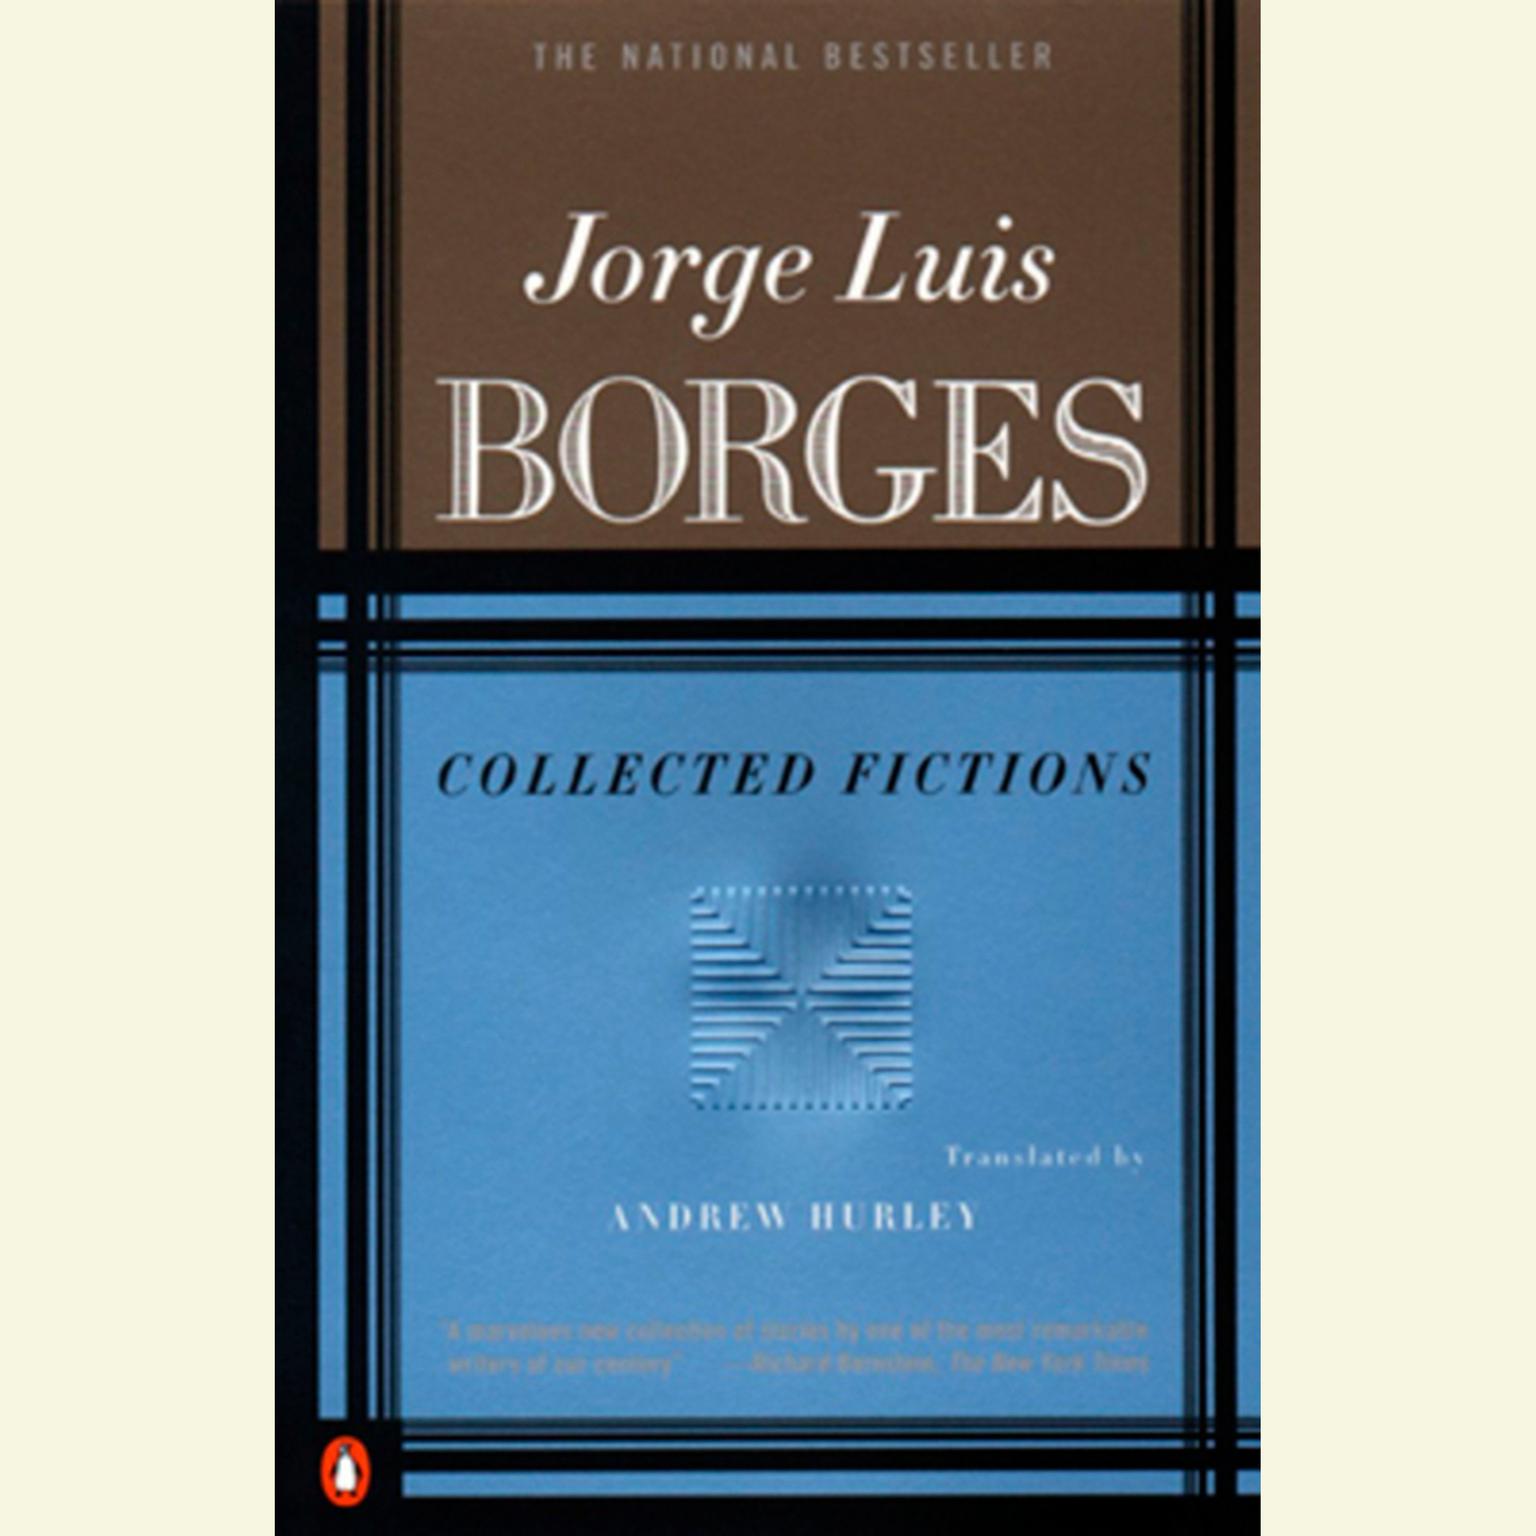 Collected Fictions (Abridged) Audiobook, by Jorge Luis Borges